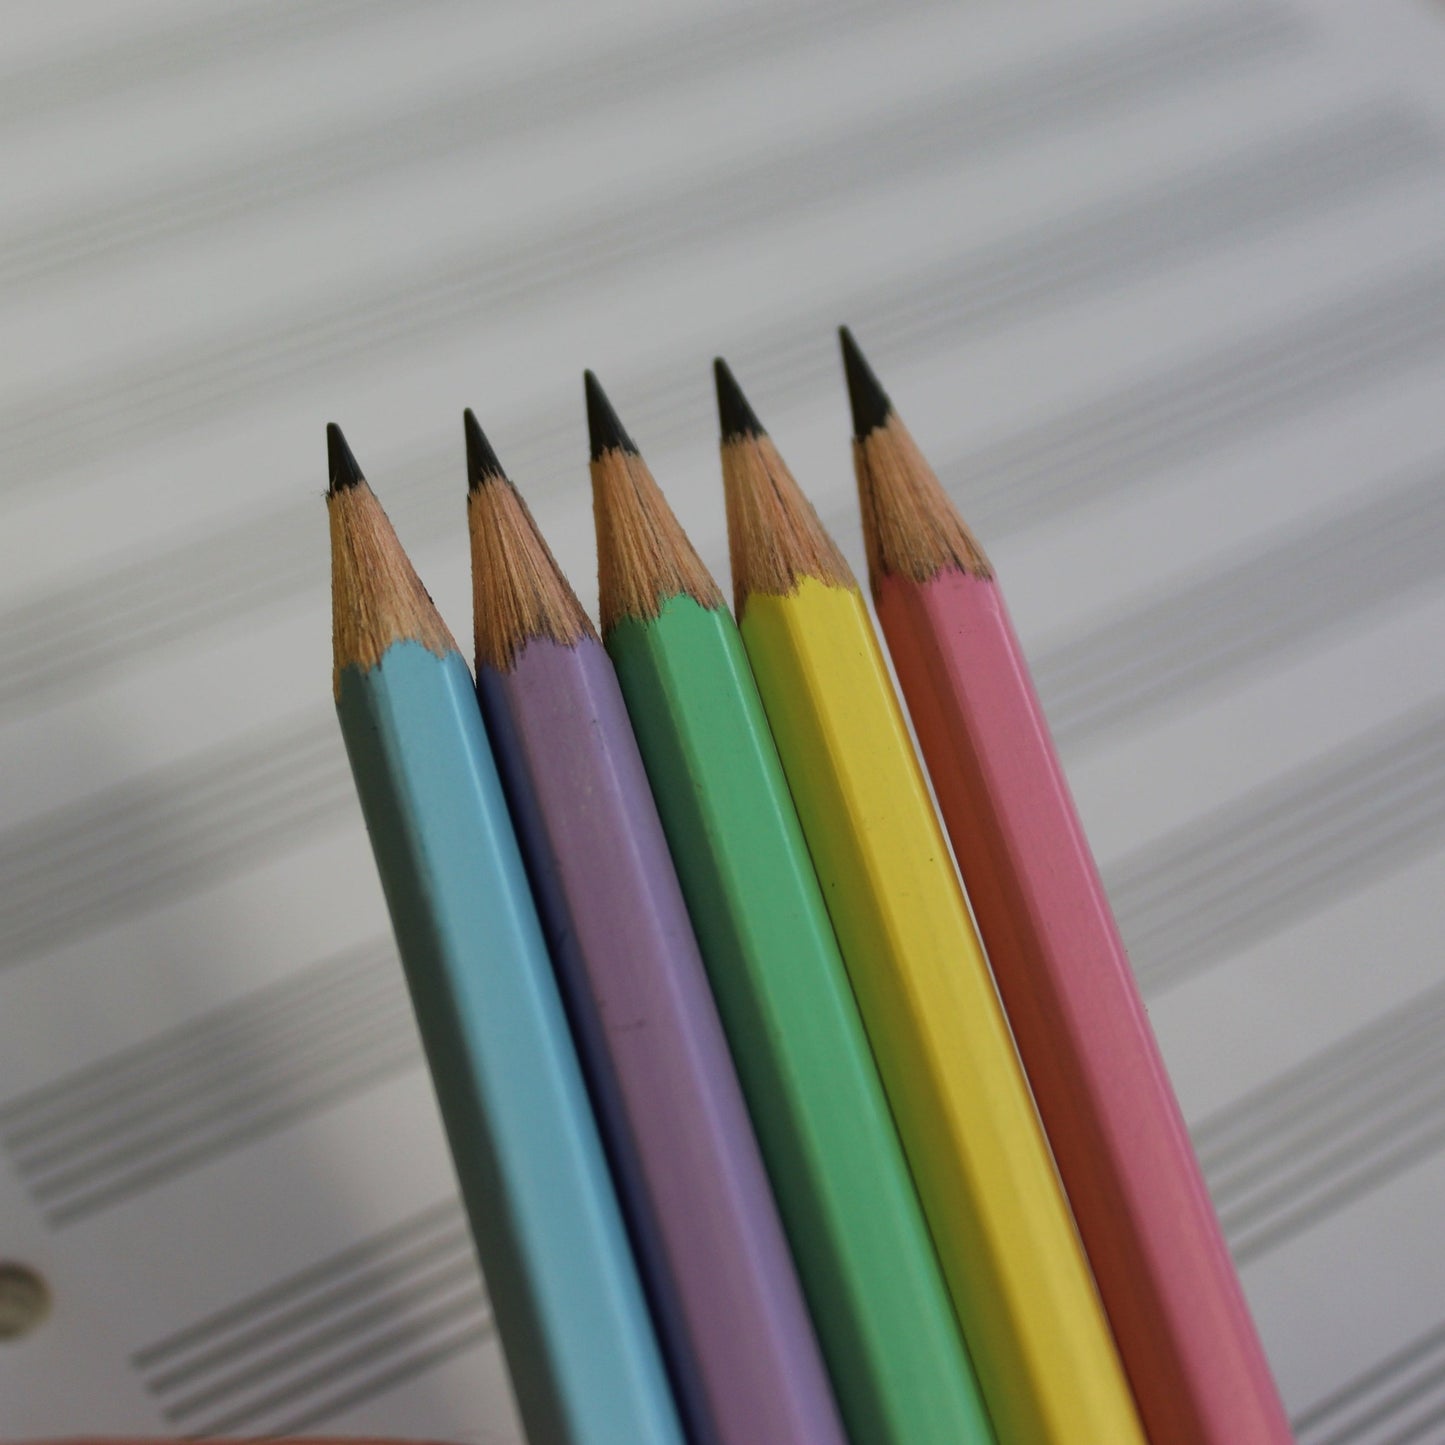 Photo shows the colour of the pastel pencils clearly; blue, purple, green, yellow and pink.